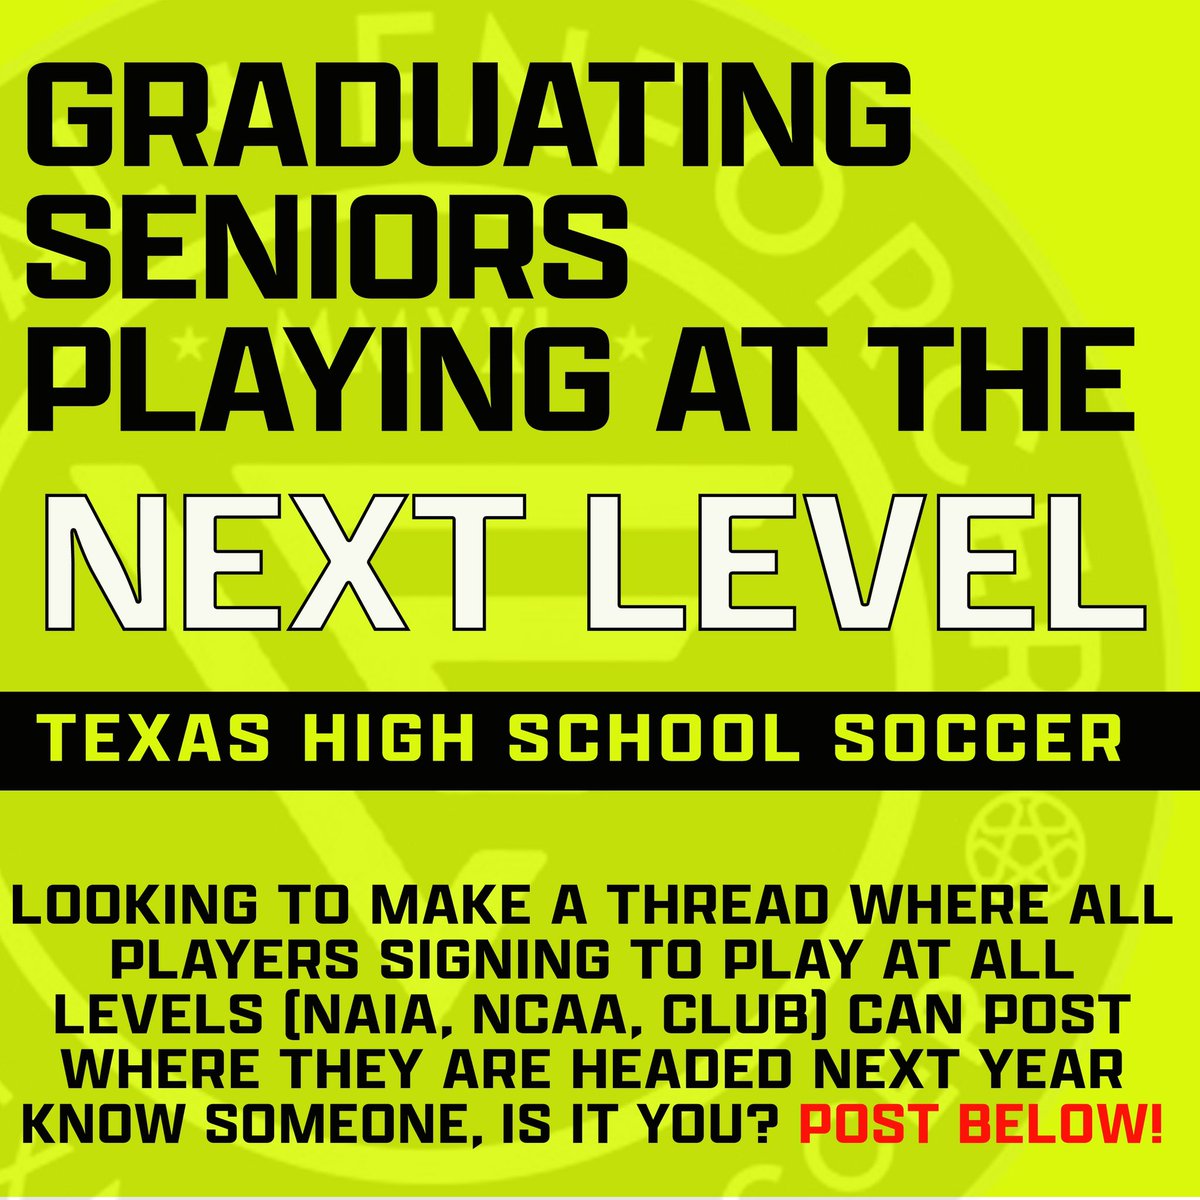 🚨🚨𝐀𝐭𝐭𝐞𝐧𝐭𝐢𝐨𝐧 𝐀𝐥𝐥 𝟐𝟎𝟐𝟒 𝐒𝐞𝐧𝐢𝐨𝐫𝐬 !! 🚨🚨 Attempting to make a GIANT thread of all graduating seniors PLAYING AT THE NEXT LEVEL. Asking teams or players to POST BELOW your announcement, or simply where you’re playing next year & RT. Congratulations!